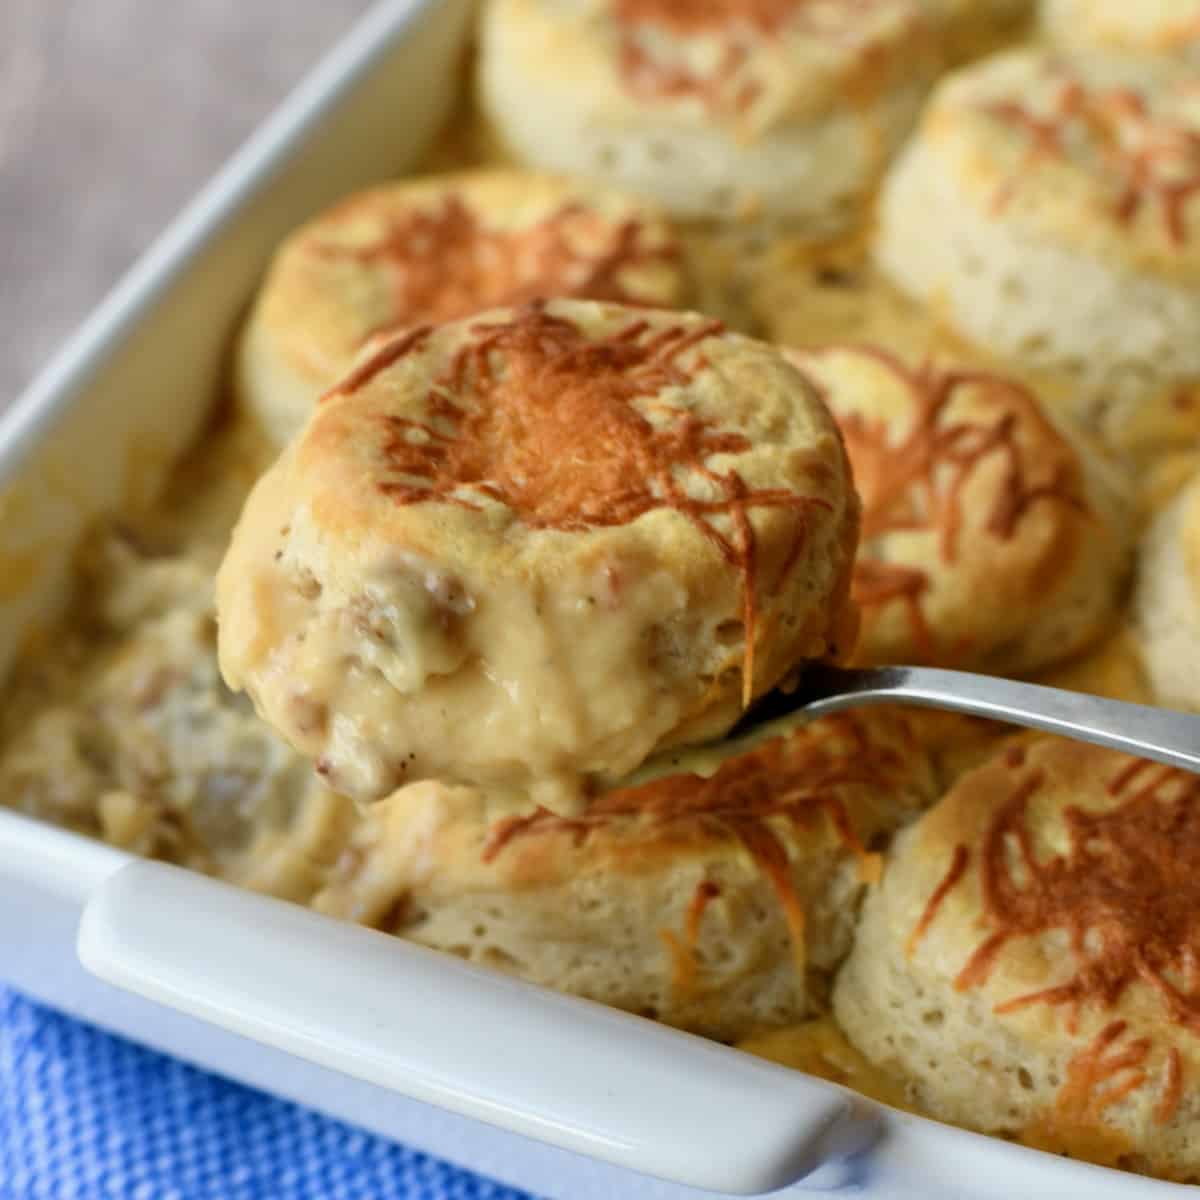 Biscuit being lifted out of casserole dish with sausage gravy on bottom.